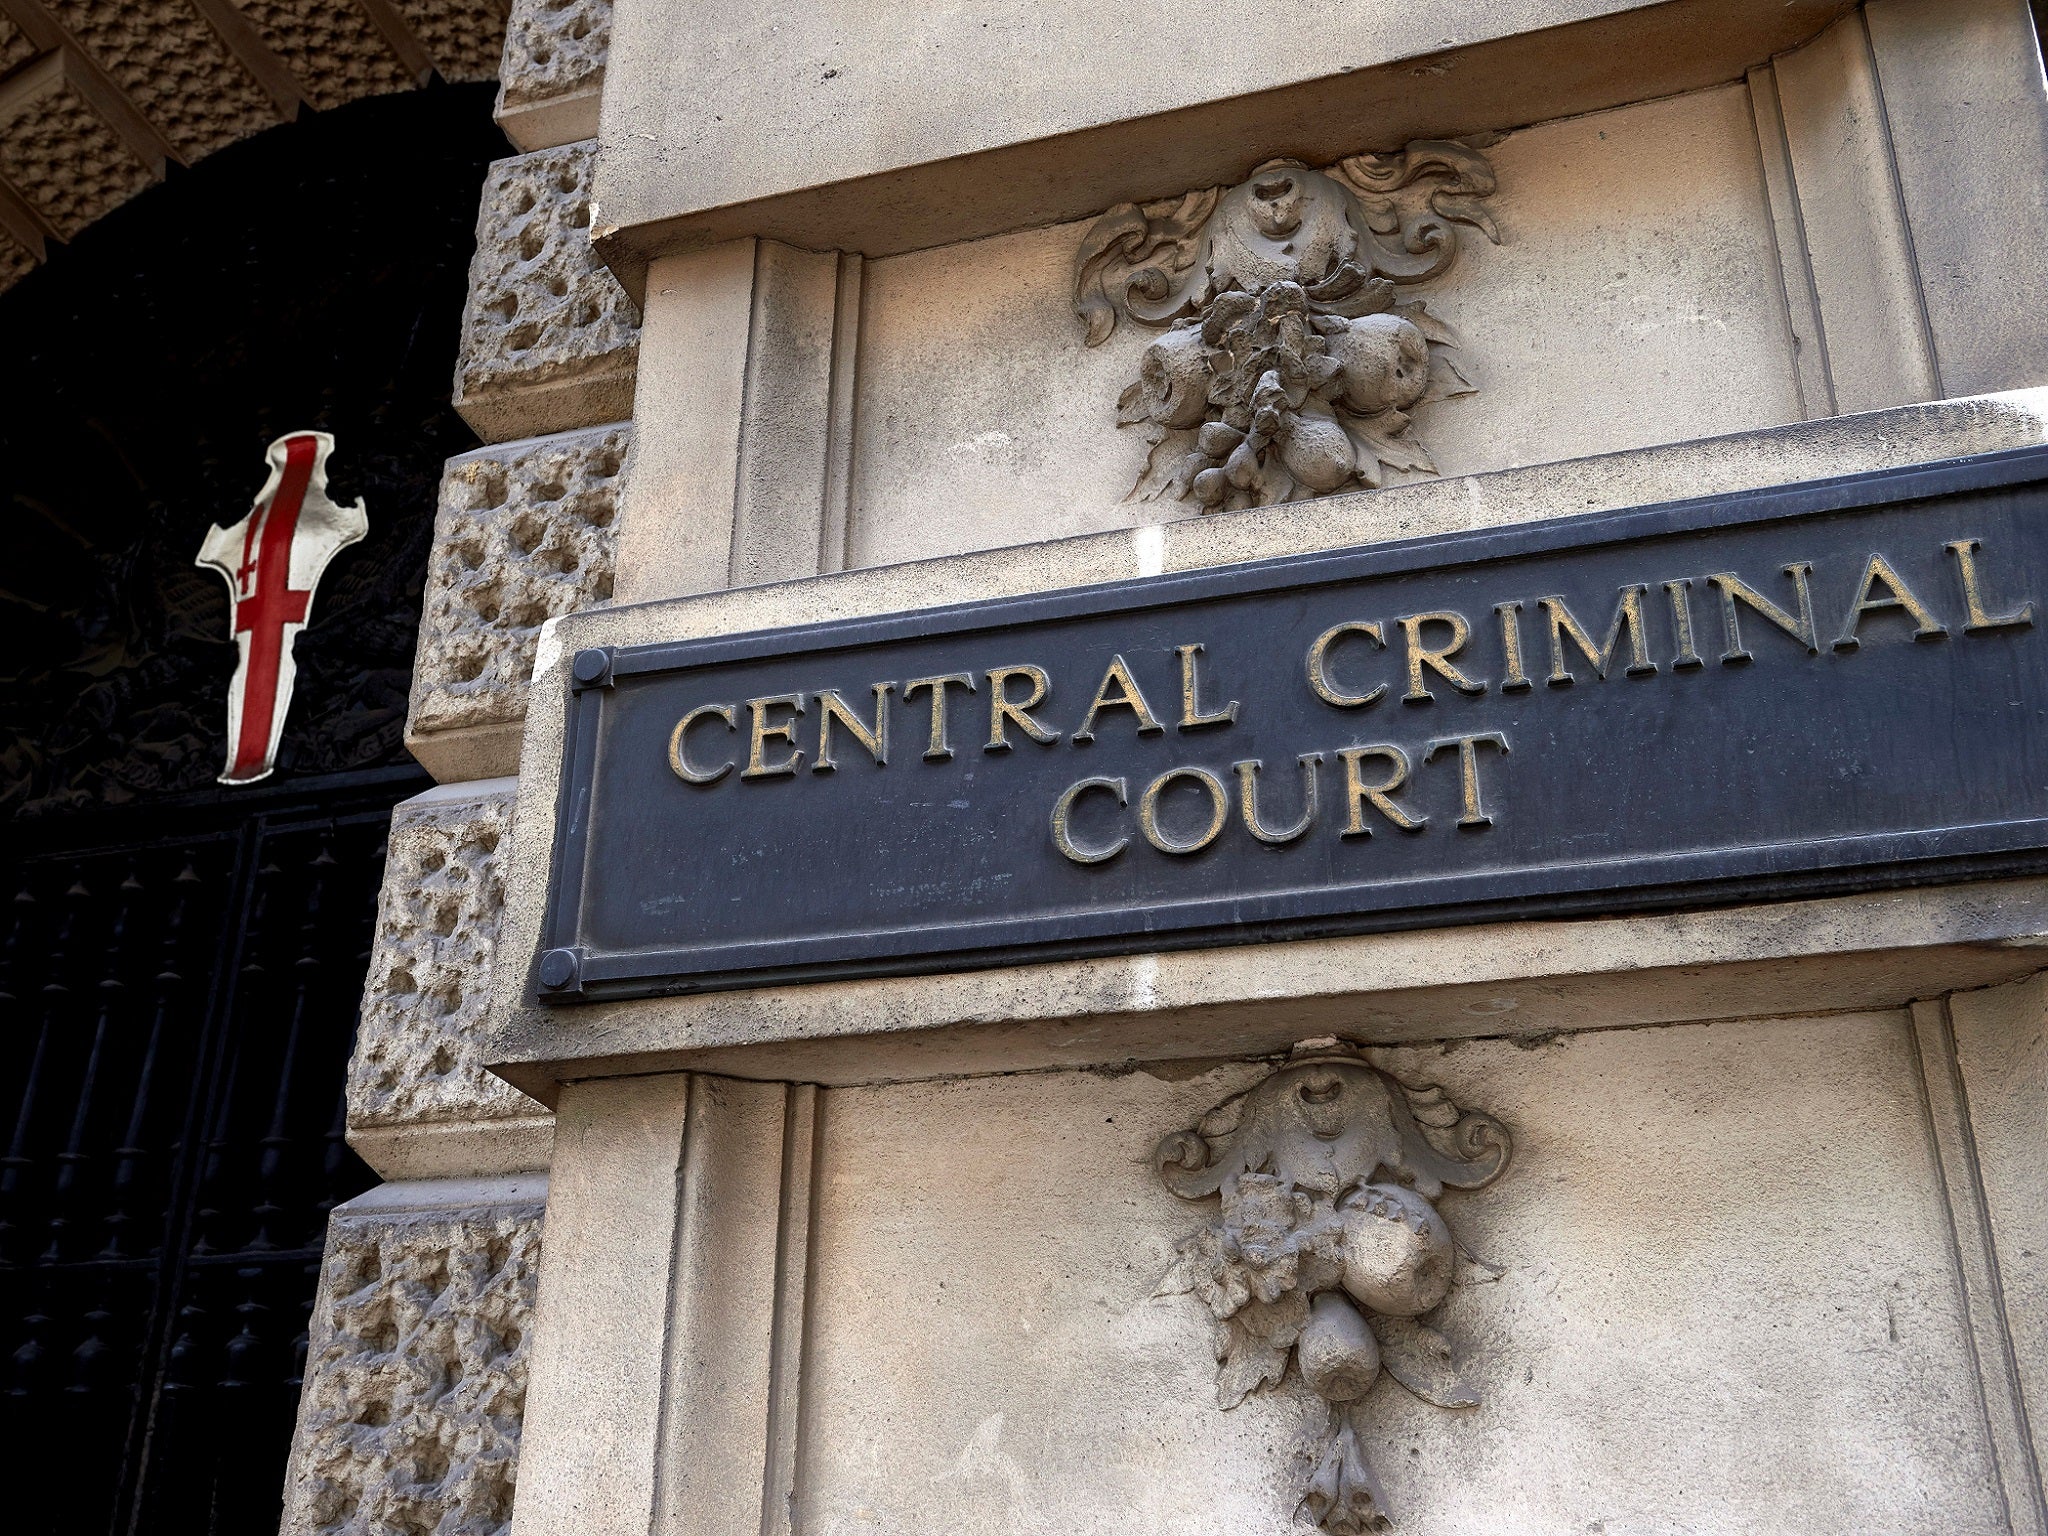 The Central Criminal Court, commonly referred to as The Old Bailey, in central London.